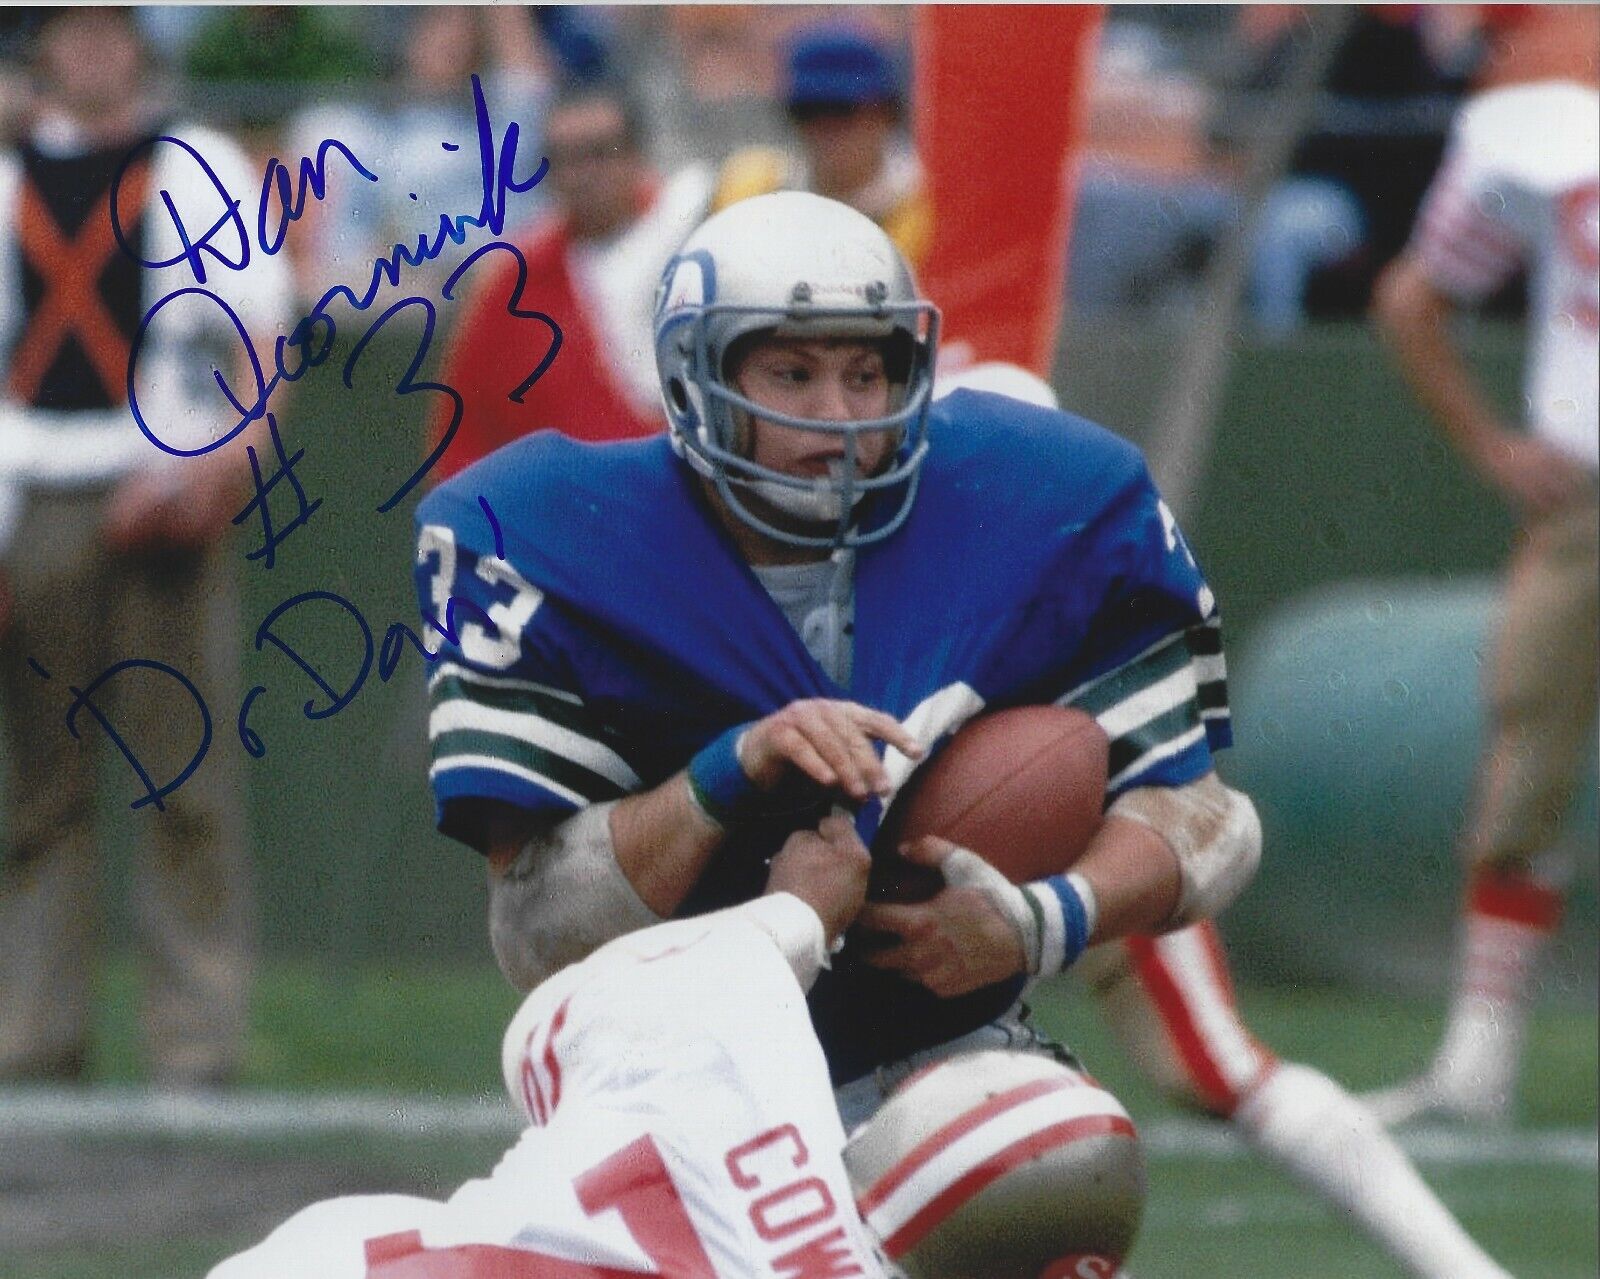 Signed 8x10 DAN DOORNINK Seattle Seahawks Autographed Photo Poster painting - COA